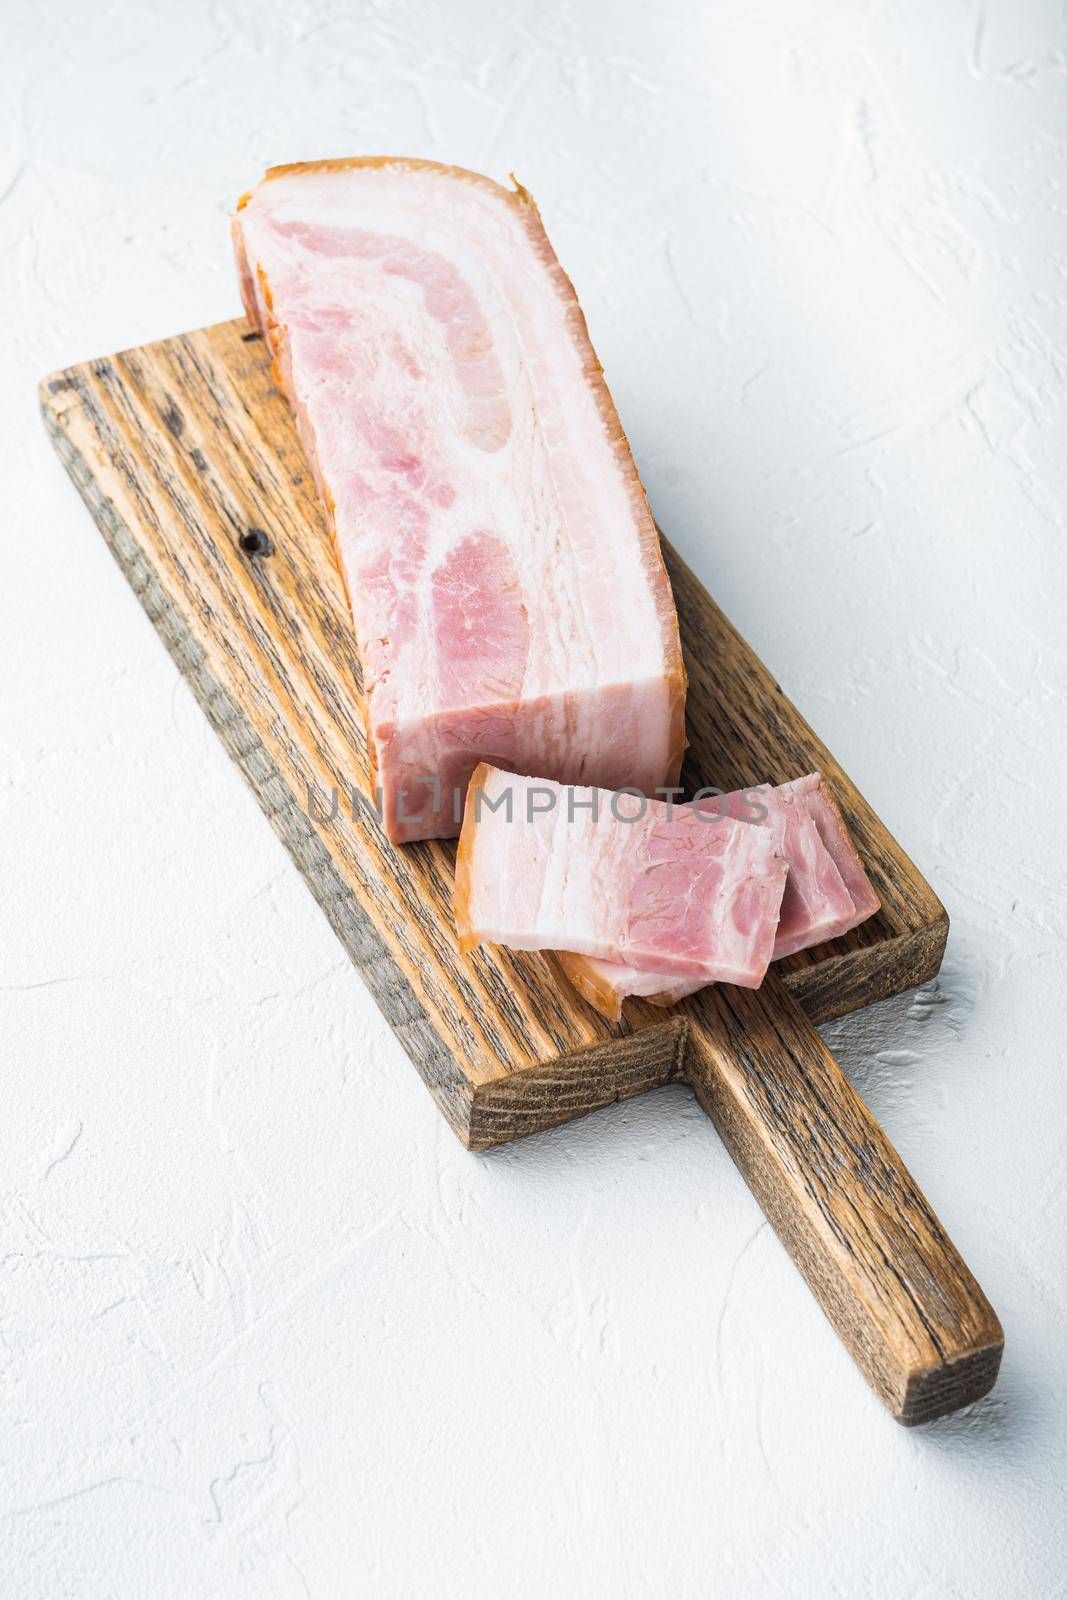 Bacon pancetta cut and sliced on white background by Ilianesolenyi